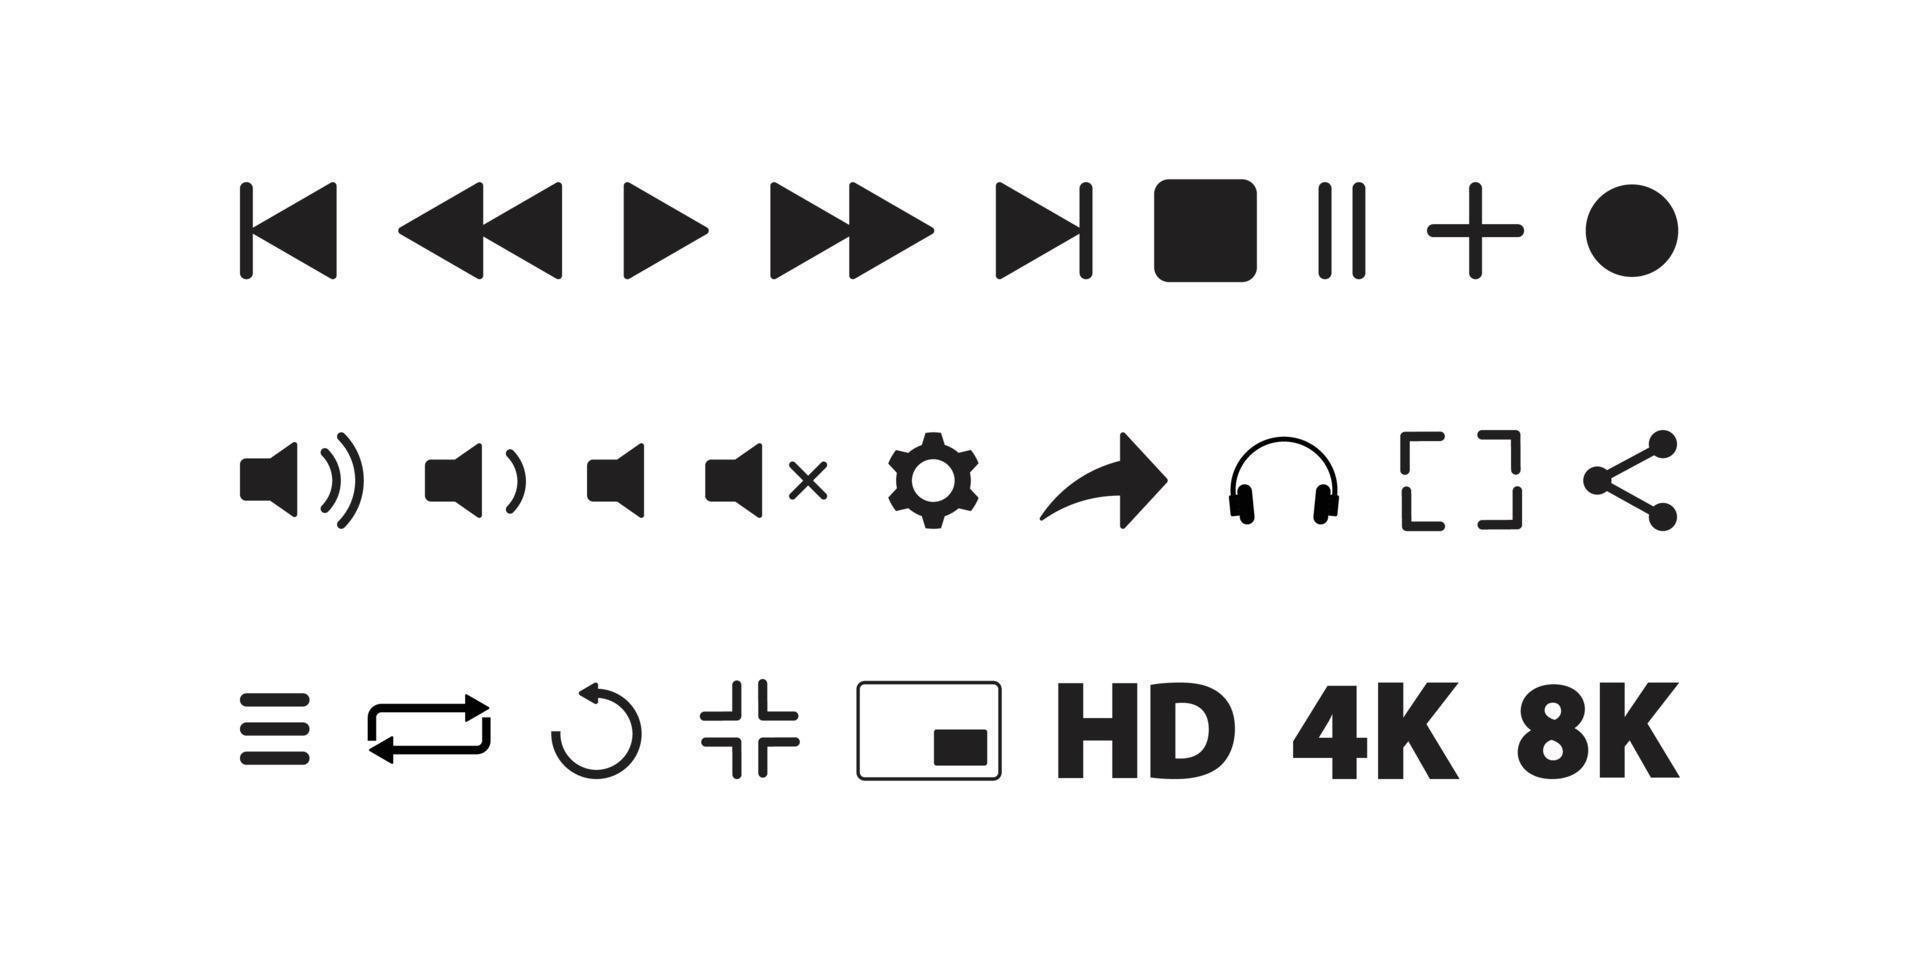 Unraveling the Meaning of Video Icons